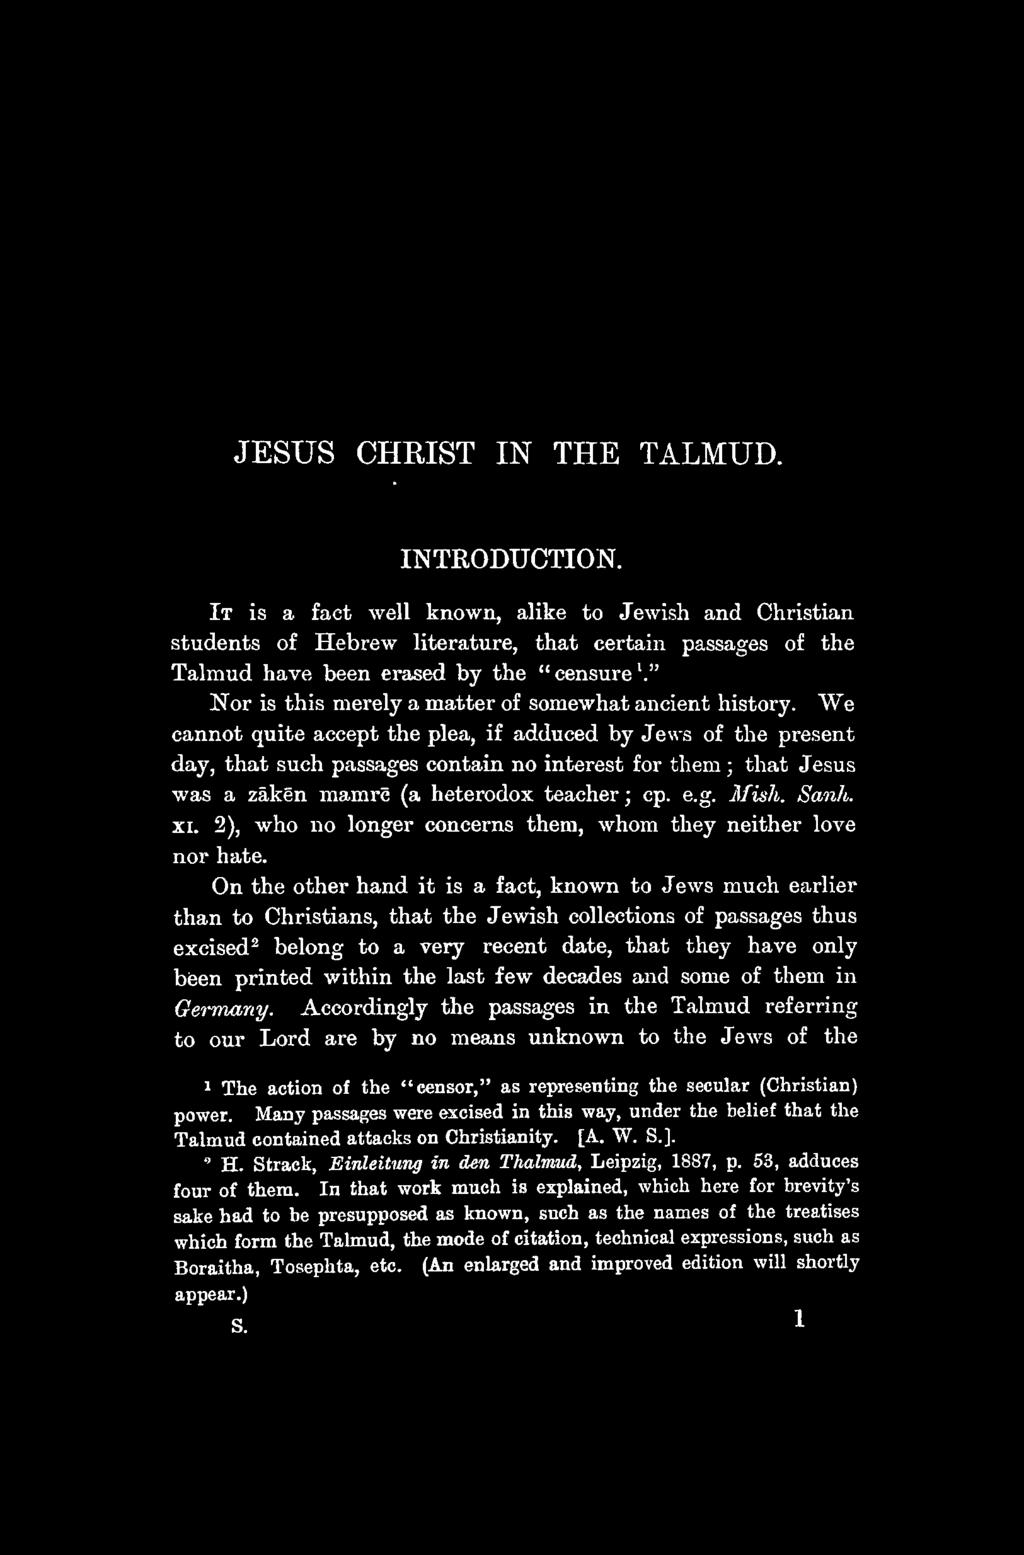 JESUS CHRIST IN THE TALMUD. INTRODUCTION. It is a fact well known, alike to Jewish and Christian students of Hebrew literature, that certain passages of the Talmud have been erased by the " censure '.